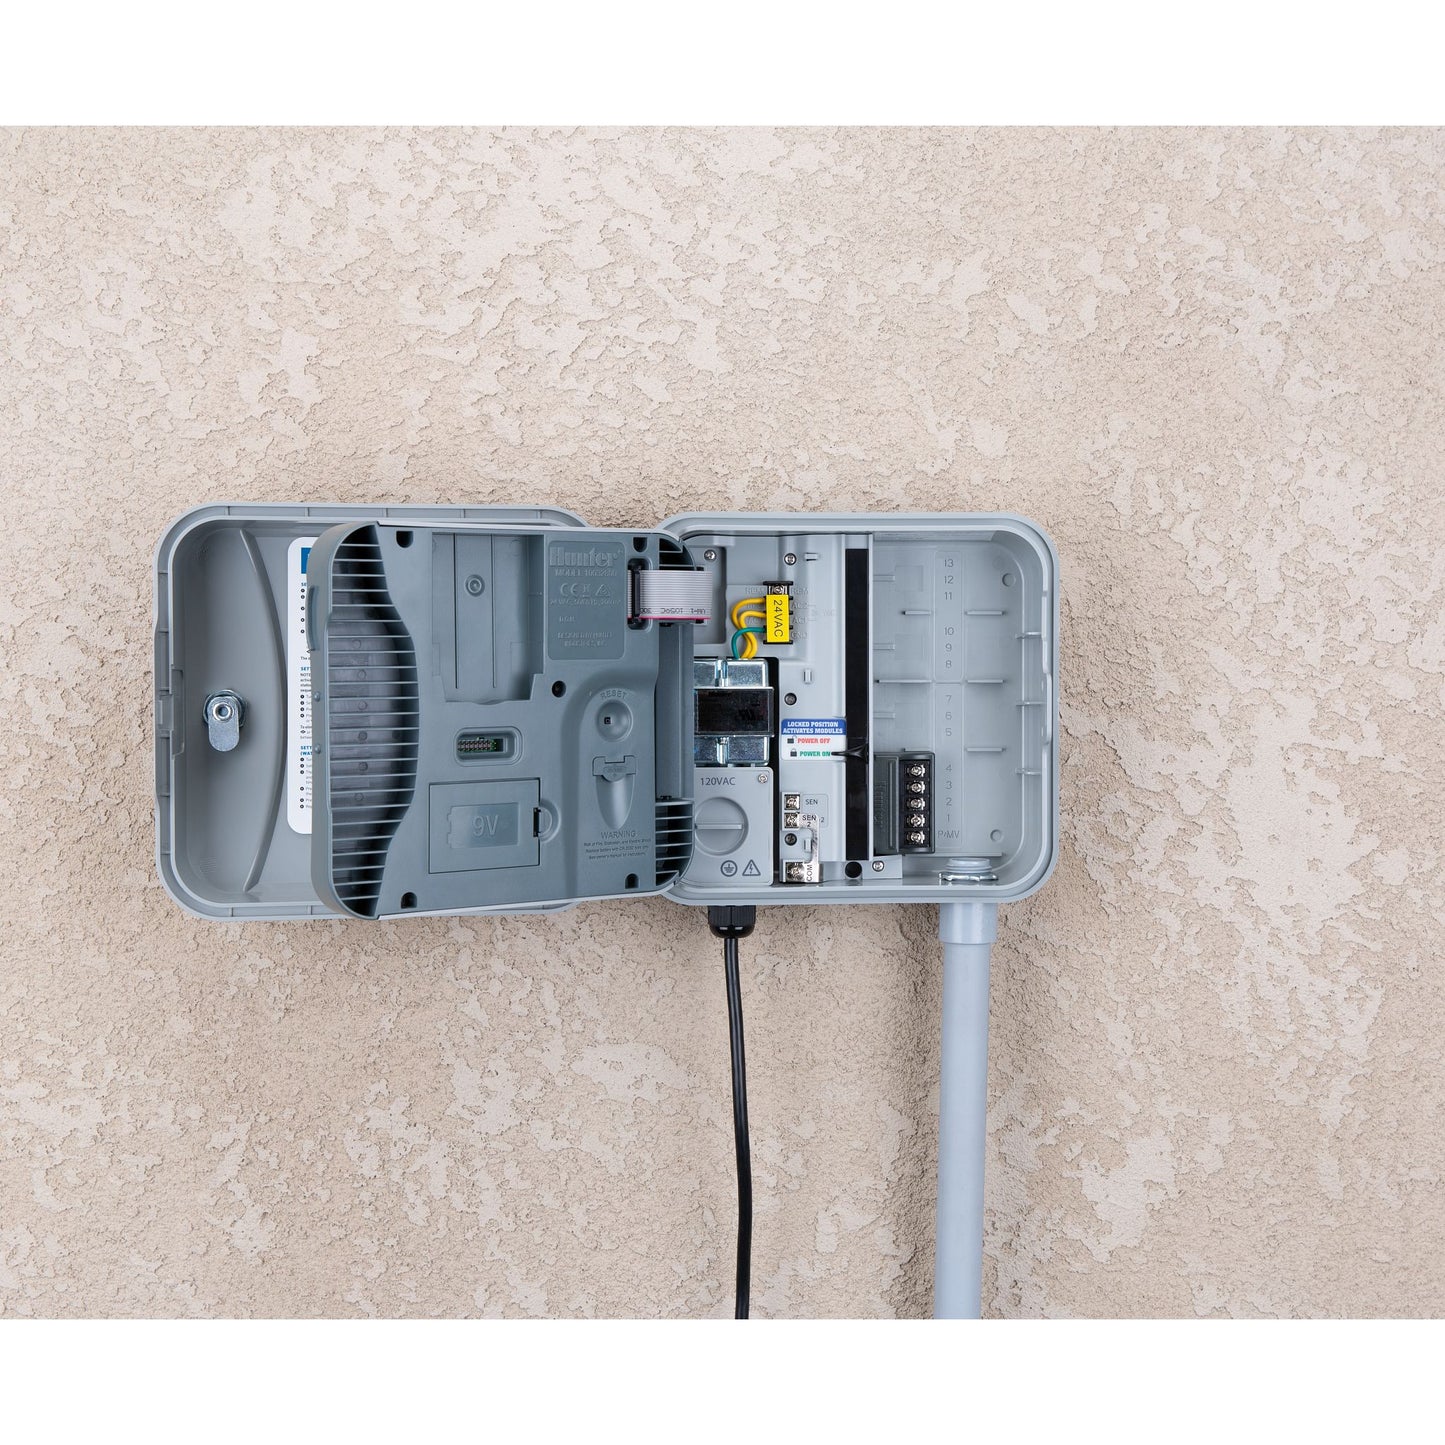 P2C-400 - Pro-C Irrigation Controller with Wall Mount Cabinet - 4 Station / Expandable to 32